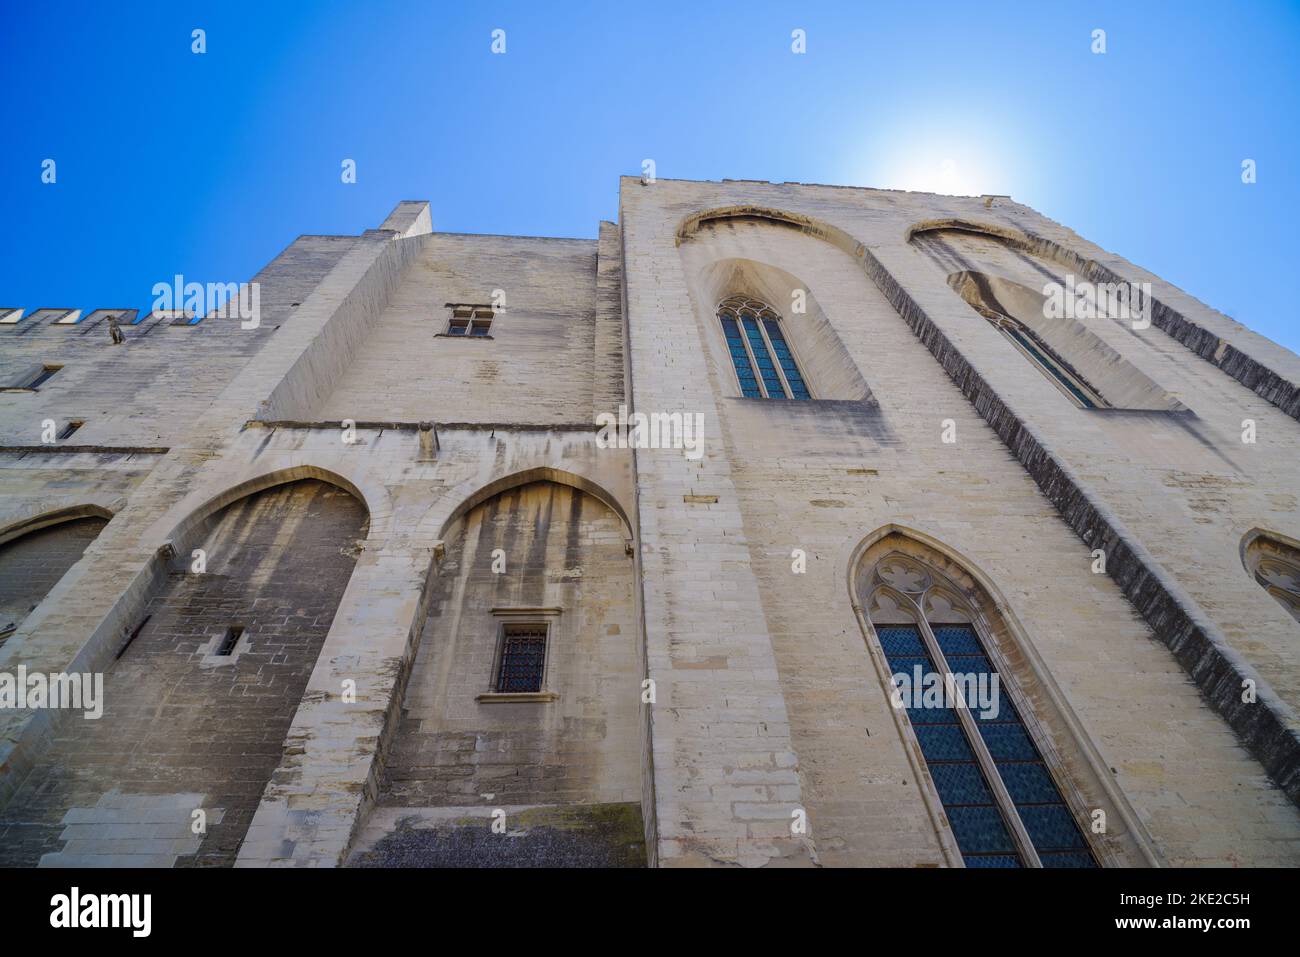 view on former popes palace (palace des papes), one of the most important medieval gothic buildings in Europe. Stock Photo